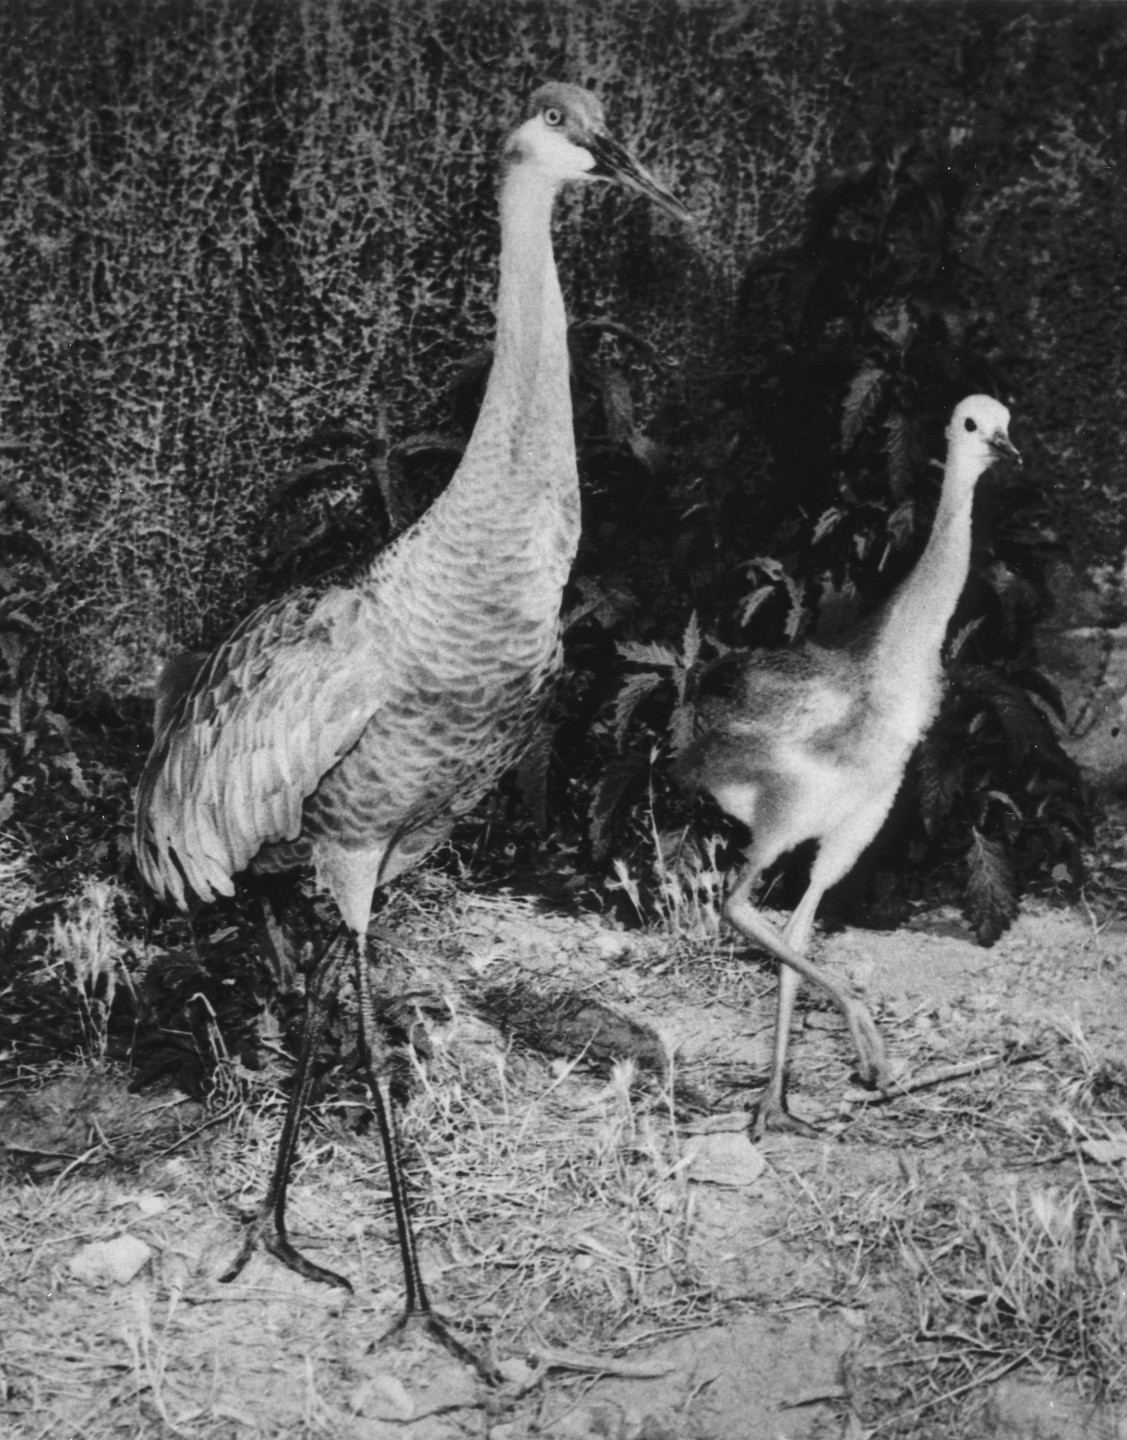 The hatching of a Florida sandhill crane on May 12, 1950, was thought to be the first hatching of this species in any zoo, an accomplishment the Zoo's bird department was very proud of.